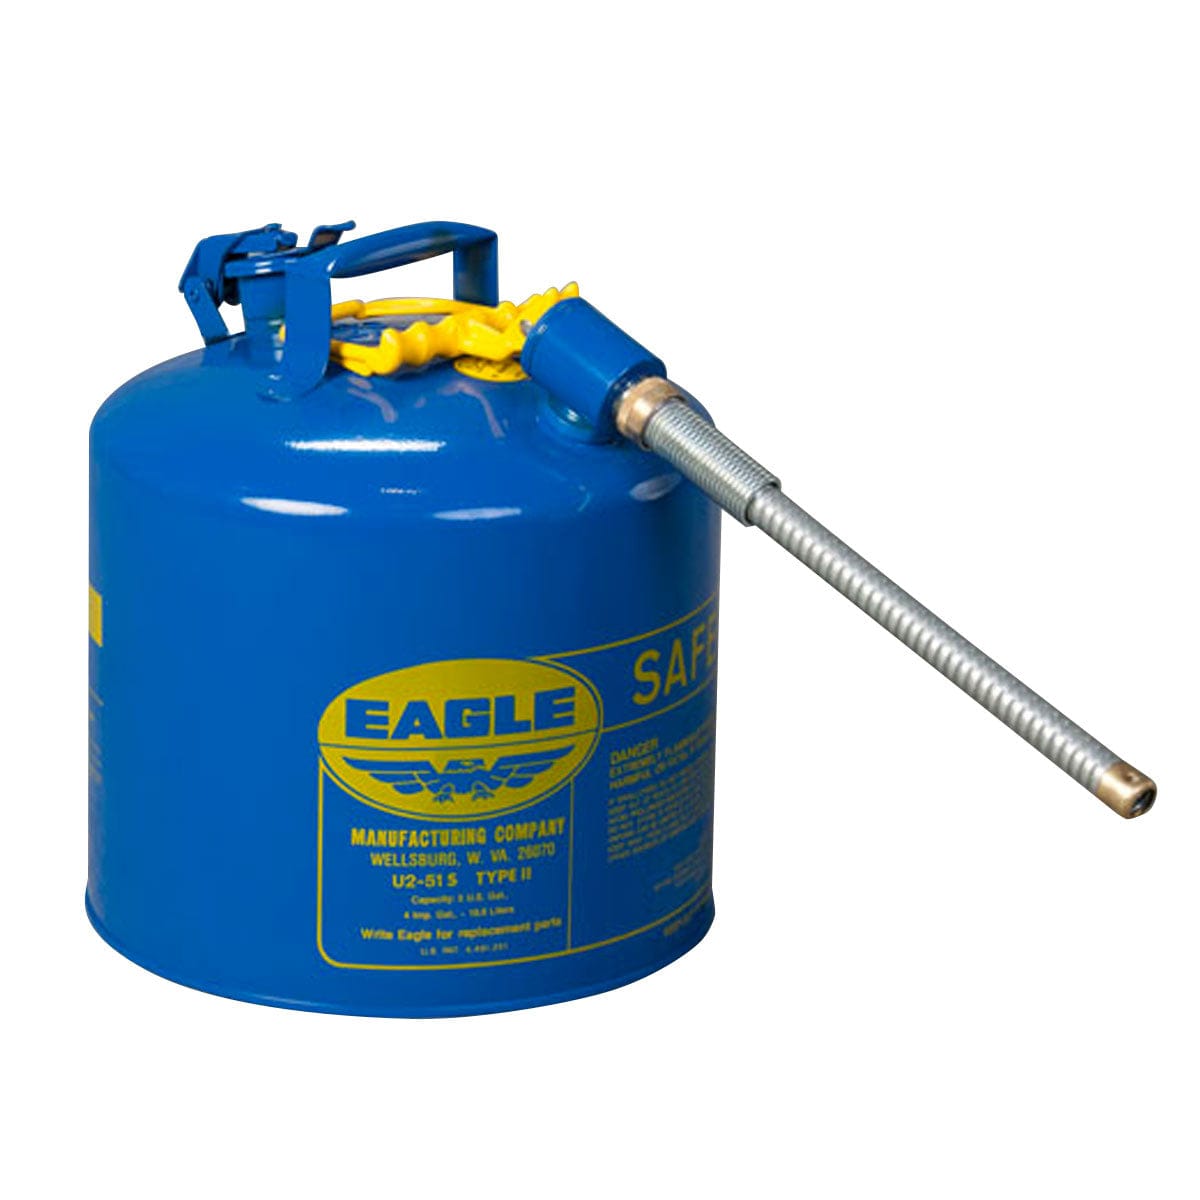 Eagle 5-gal. Type II Safety Fuel Can